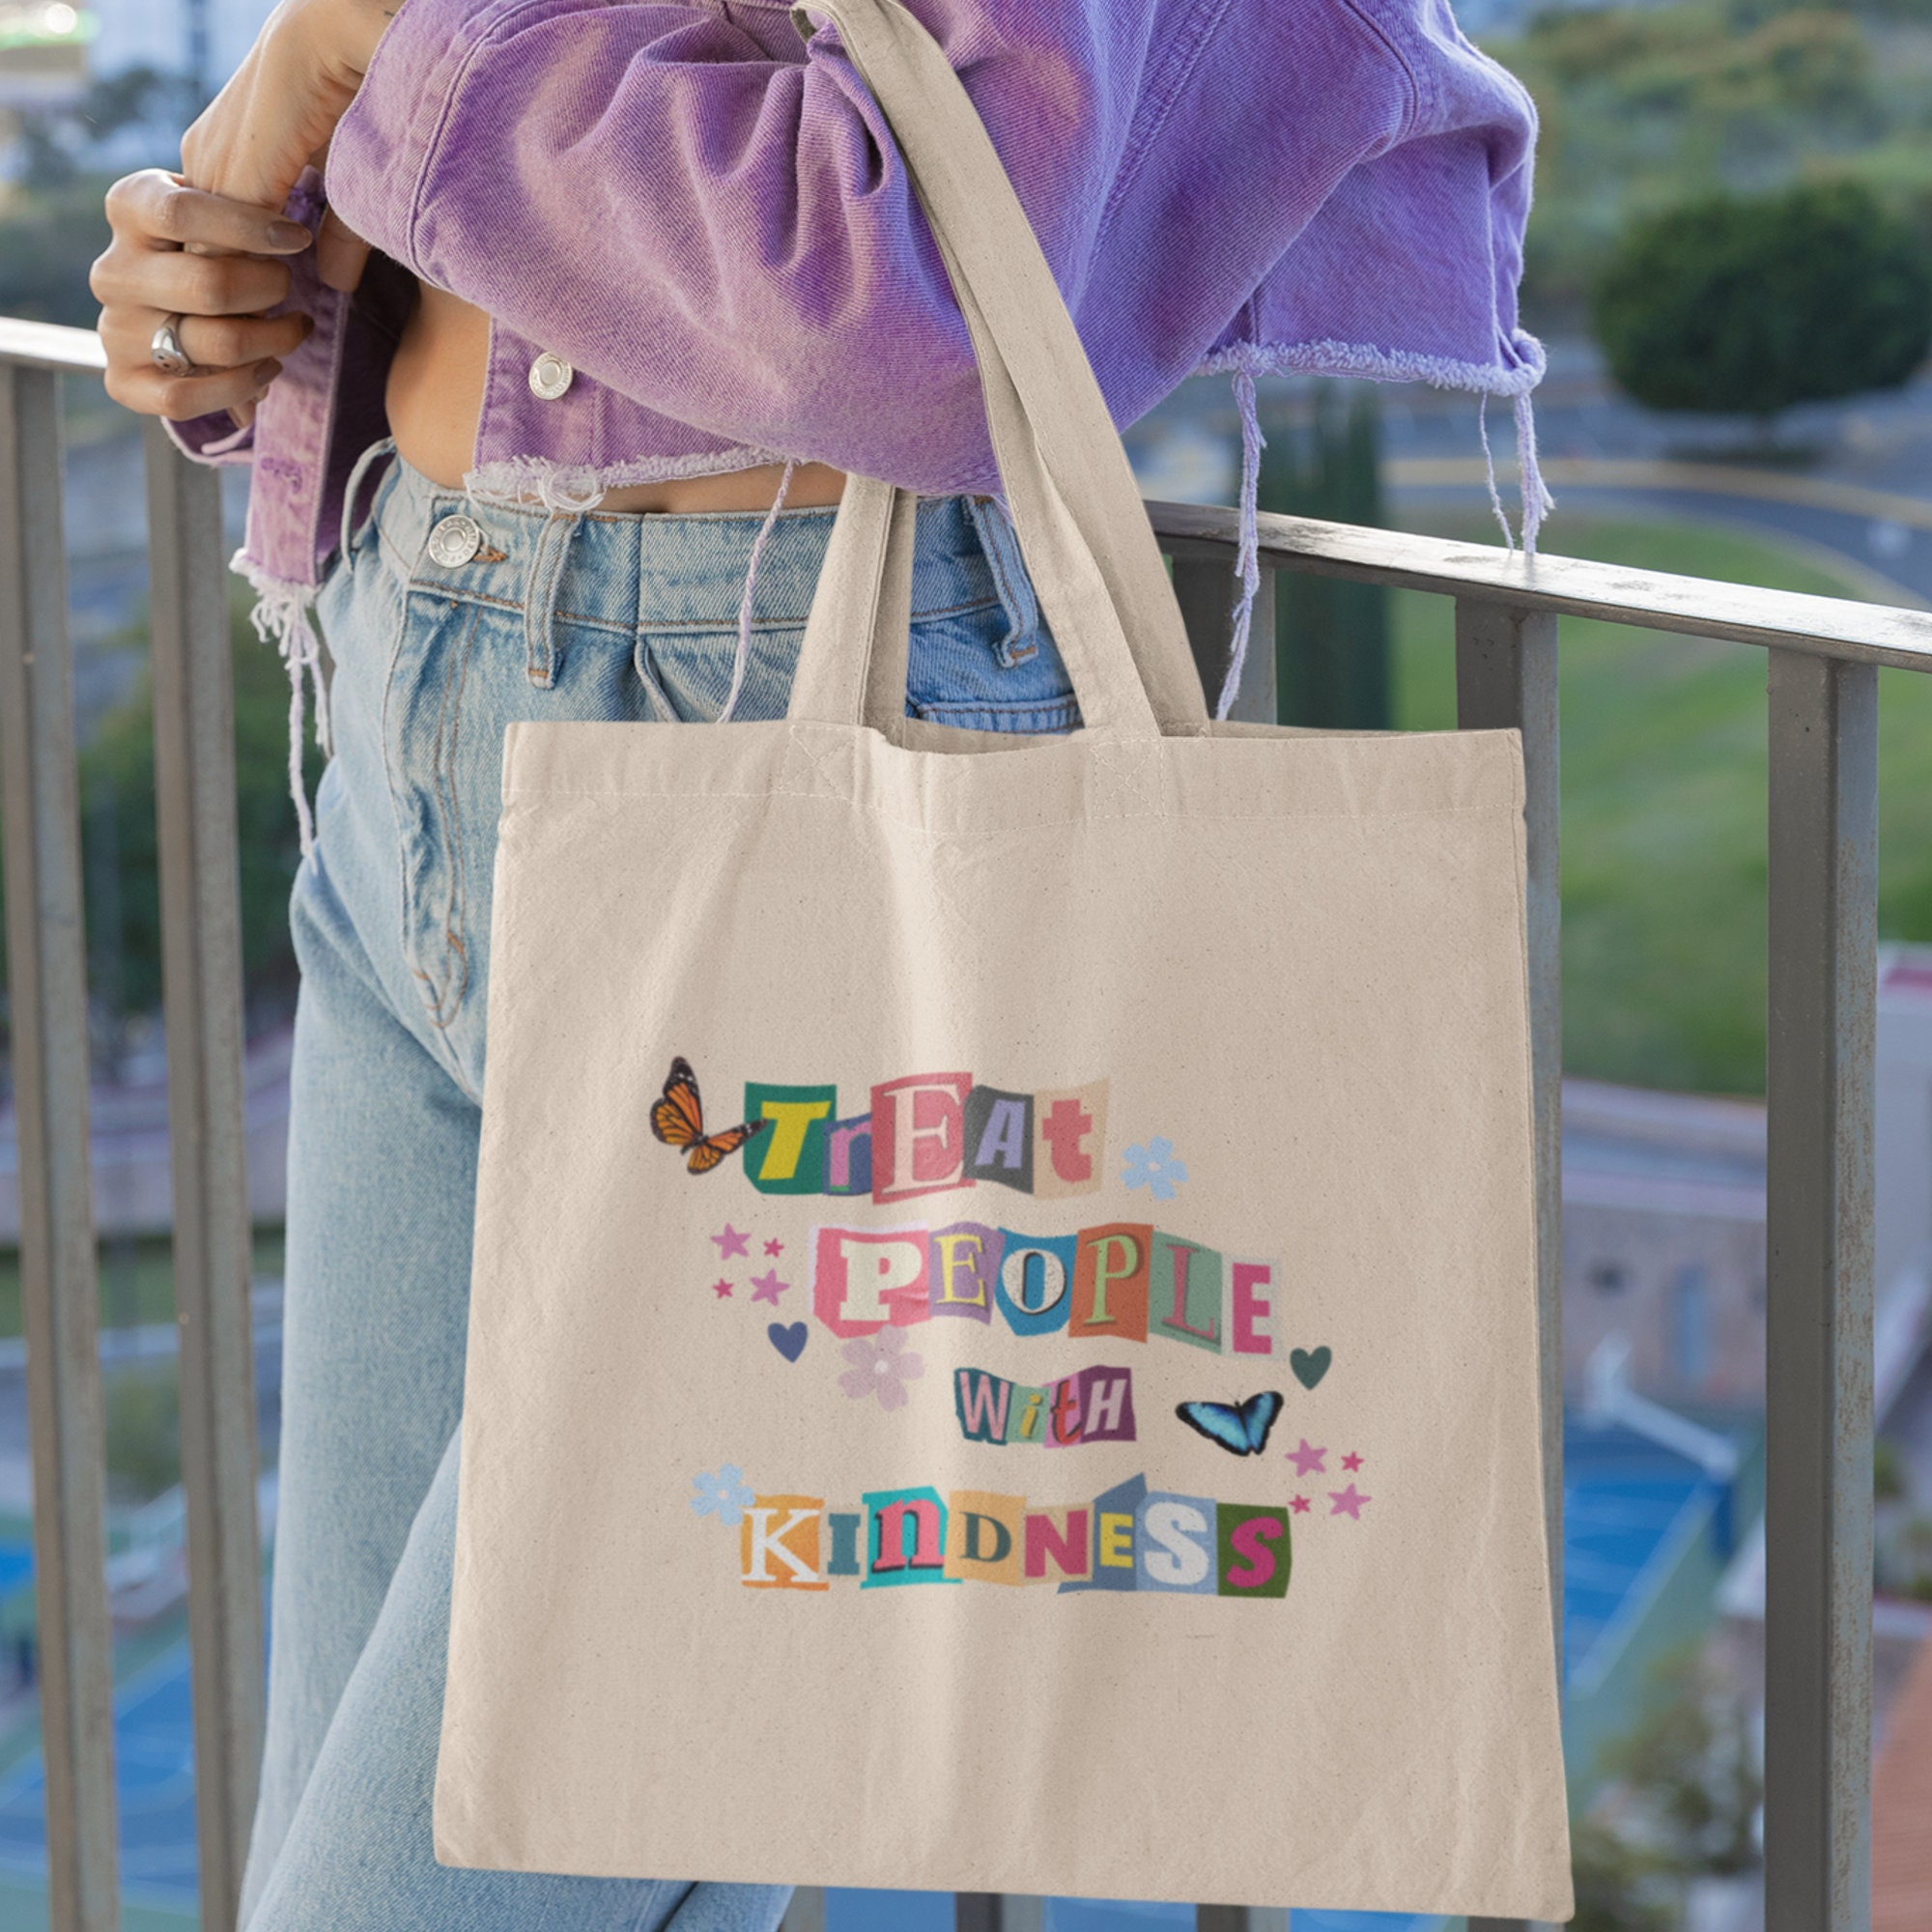 Health Care - New Jersey - Tote Bag - Hippie Soul Shop